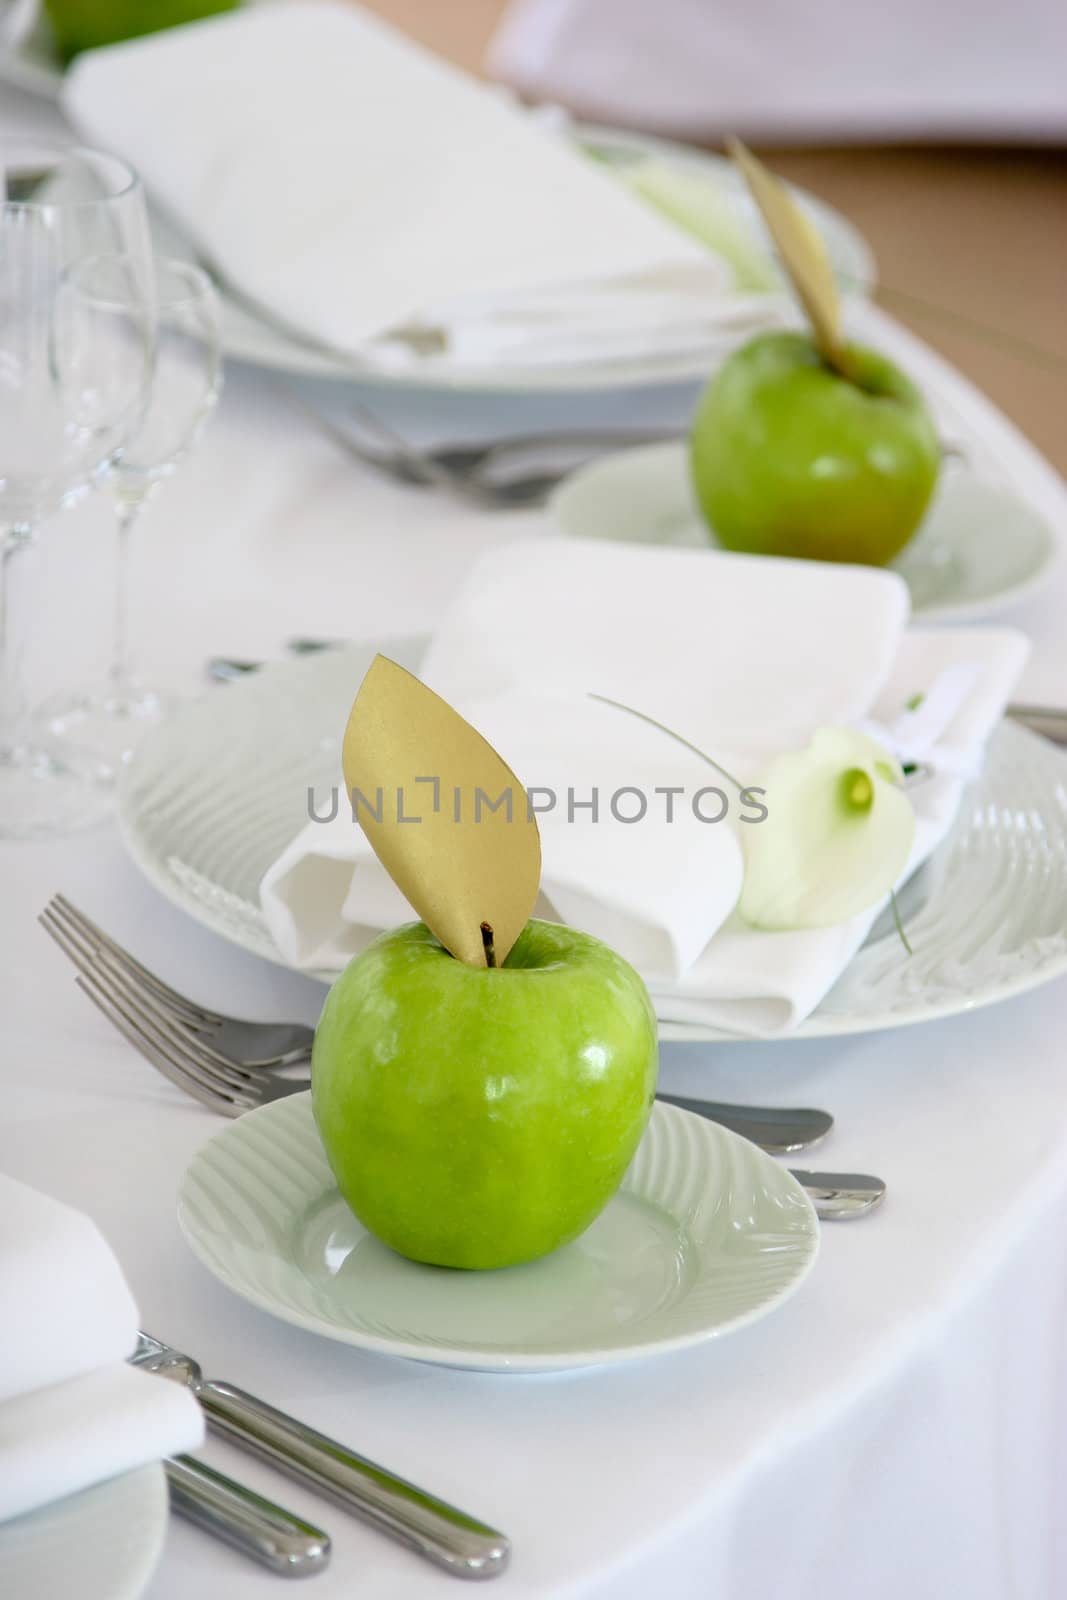 apples and flower on plates by jalta